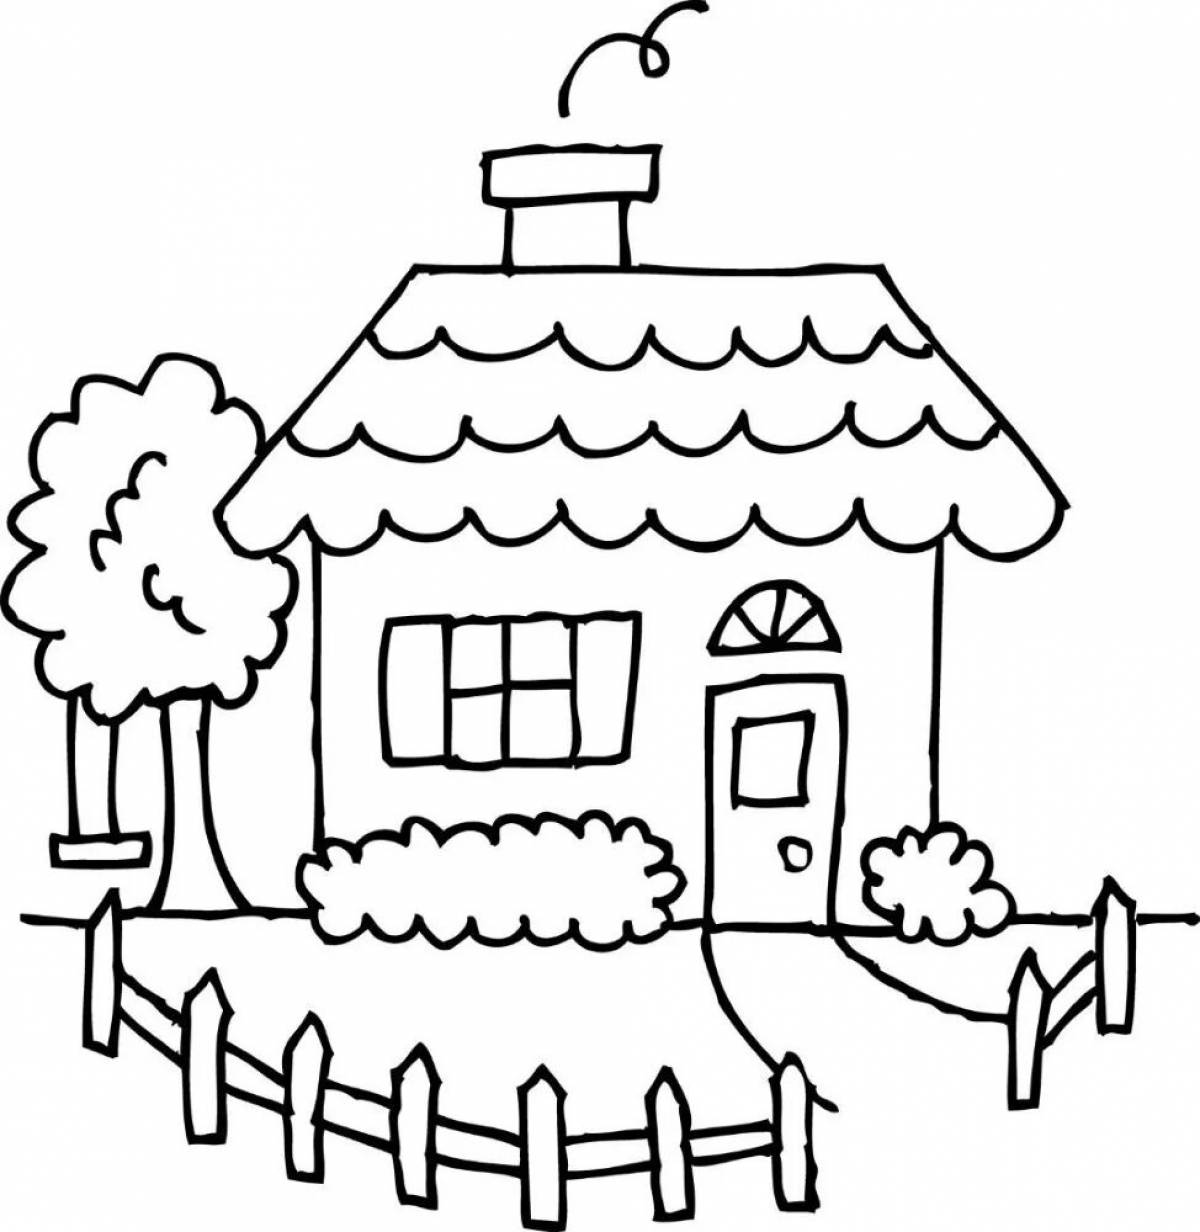 Living houses coloring for children 4-5 years old